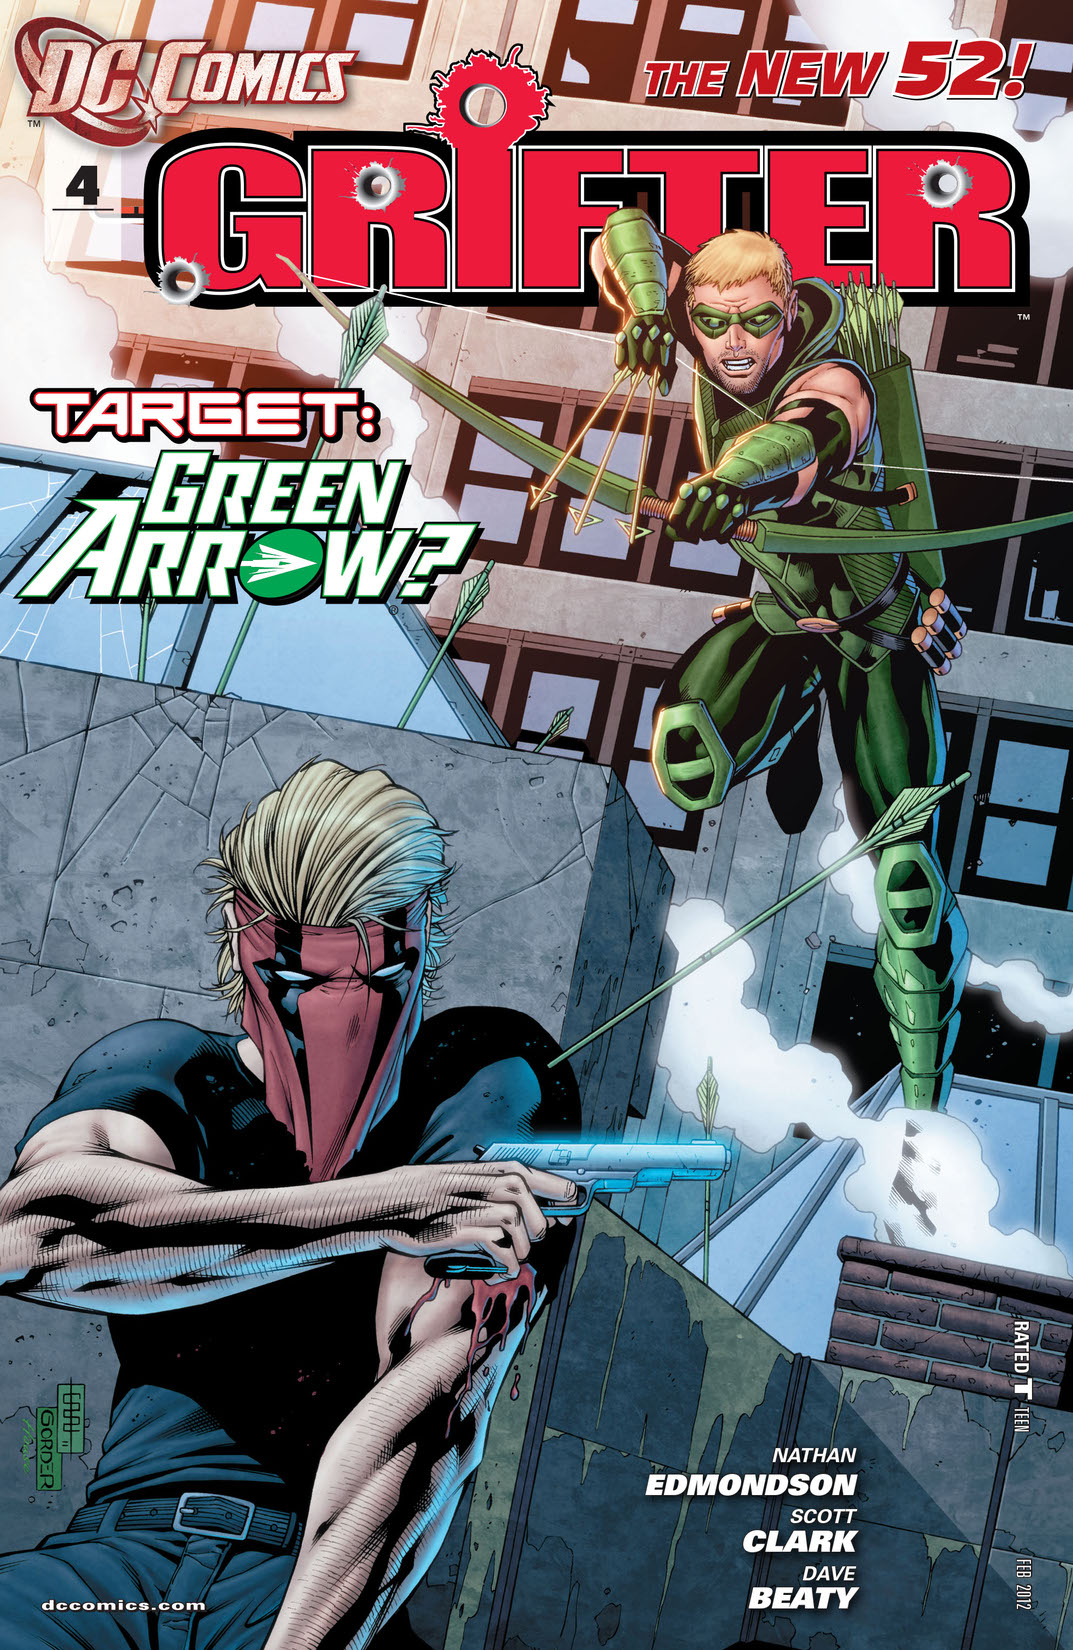 Grifter (2011-2013) #4 preview images